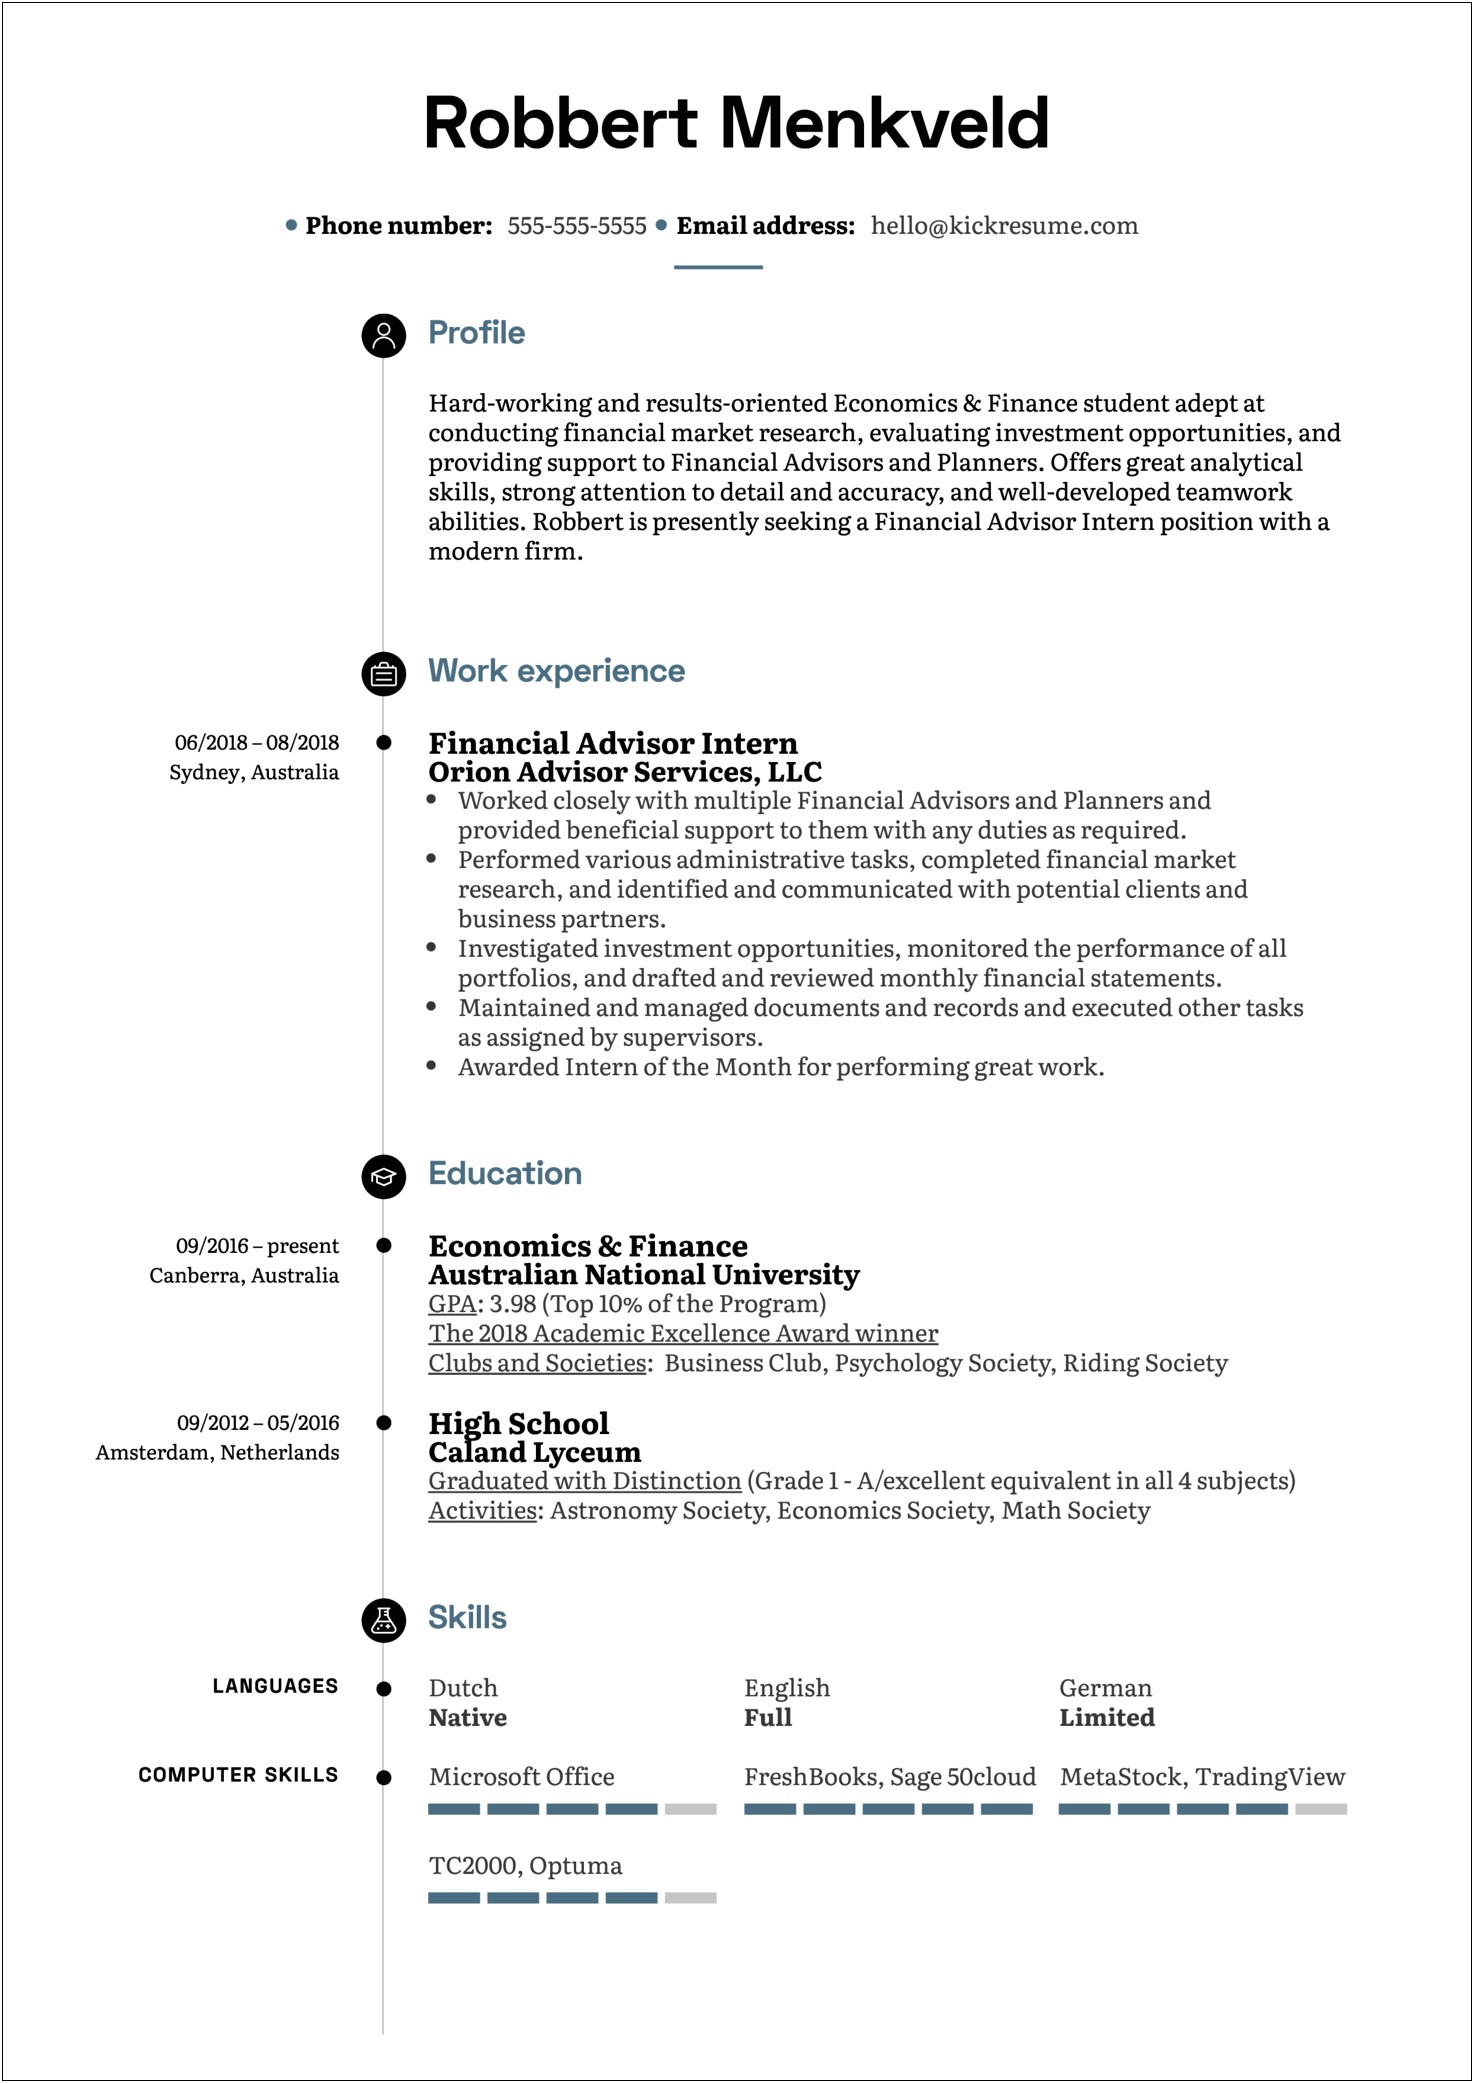 Resume Objective Statement For Financial Services